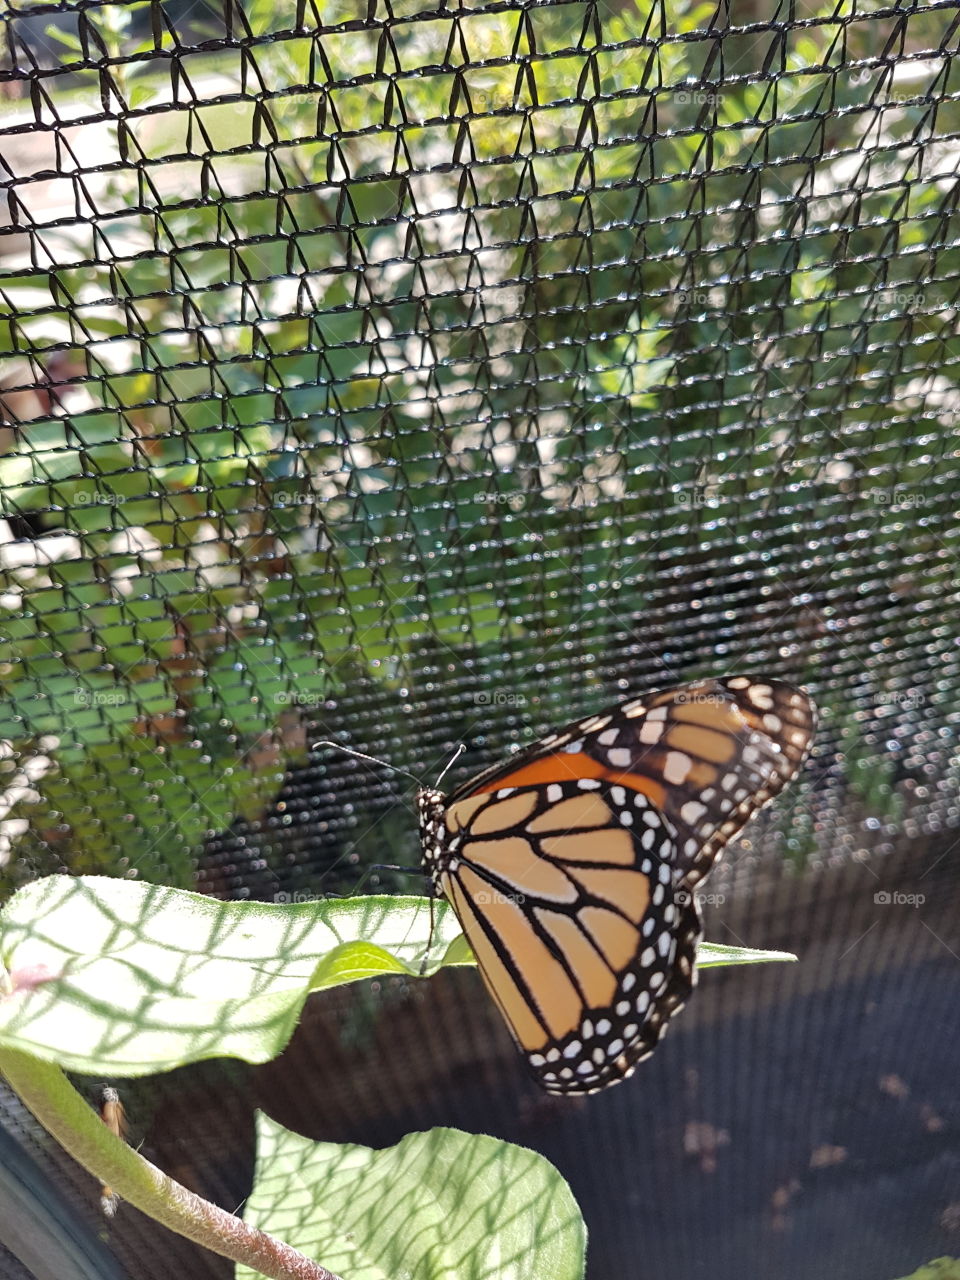 Stunning monarch butterfly perched on leaf inside a mesh enclosure.